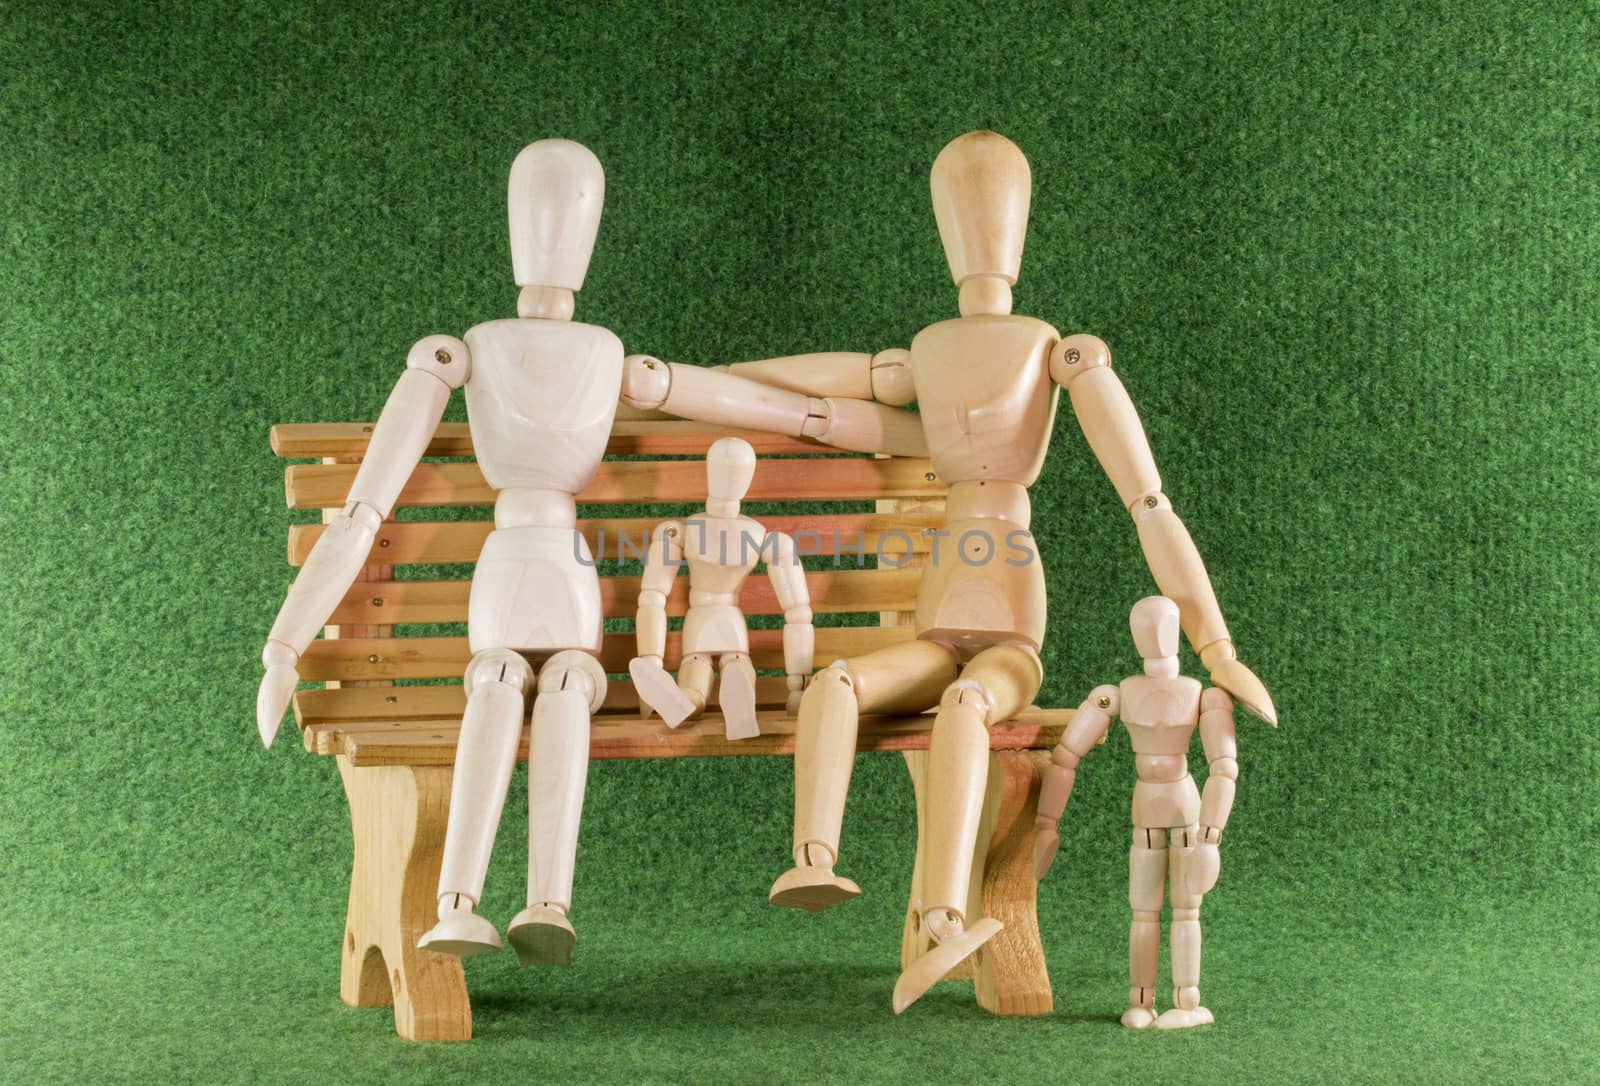 happy family with children in wooden play puppets on bench